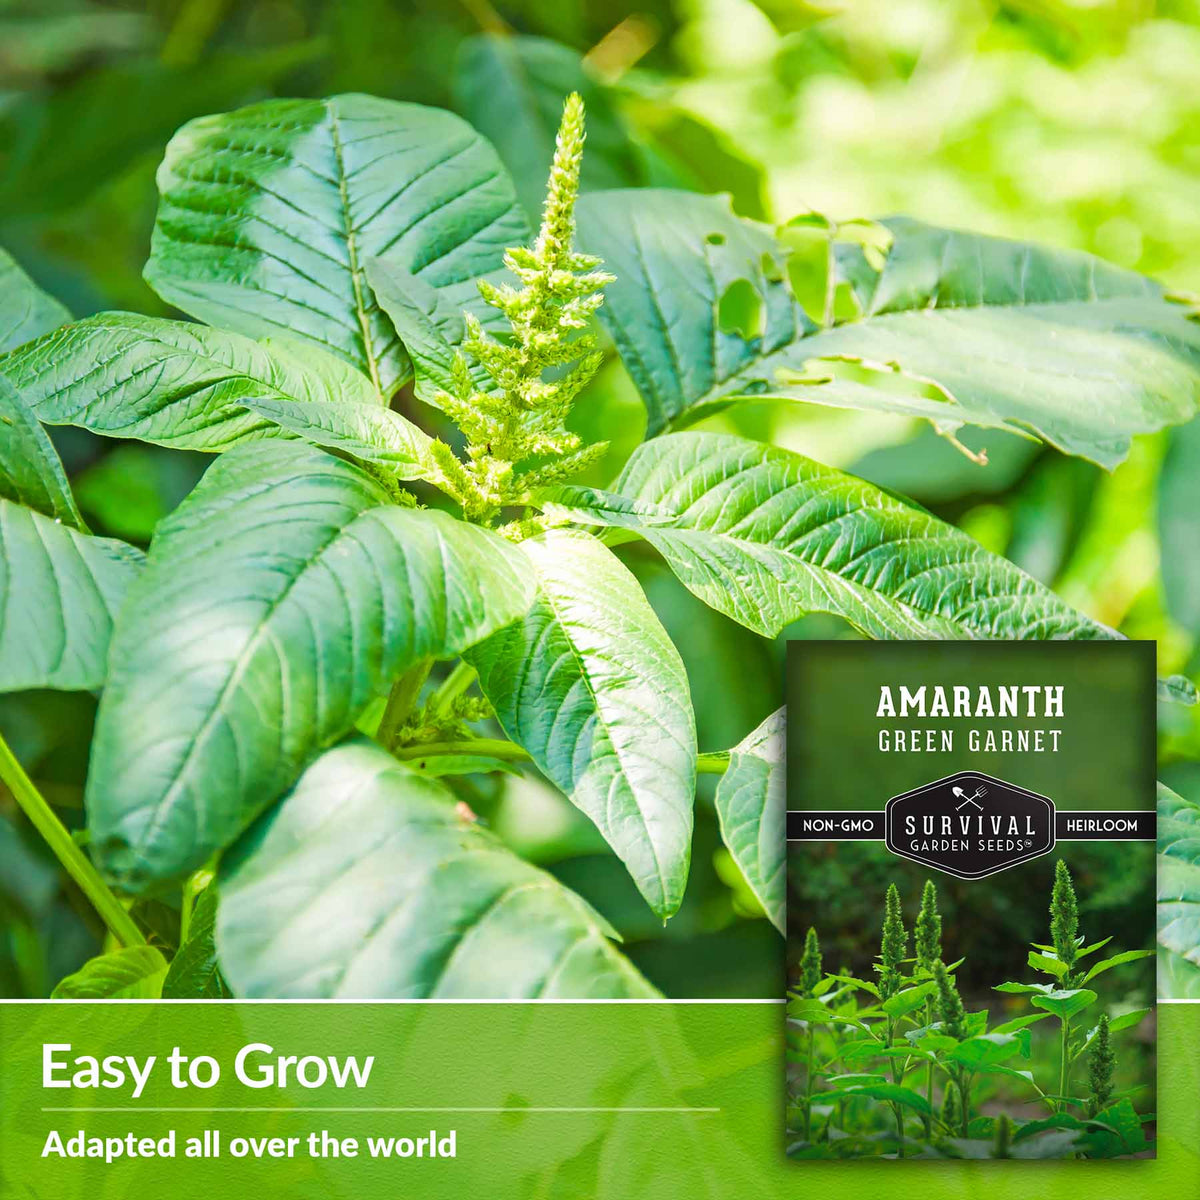 Easy to grow- adapted all over the world